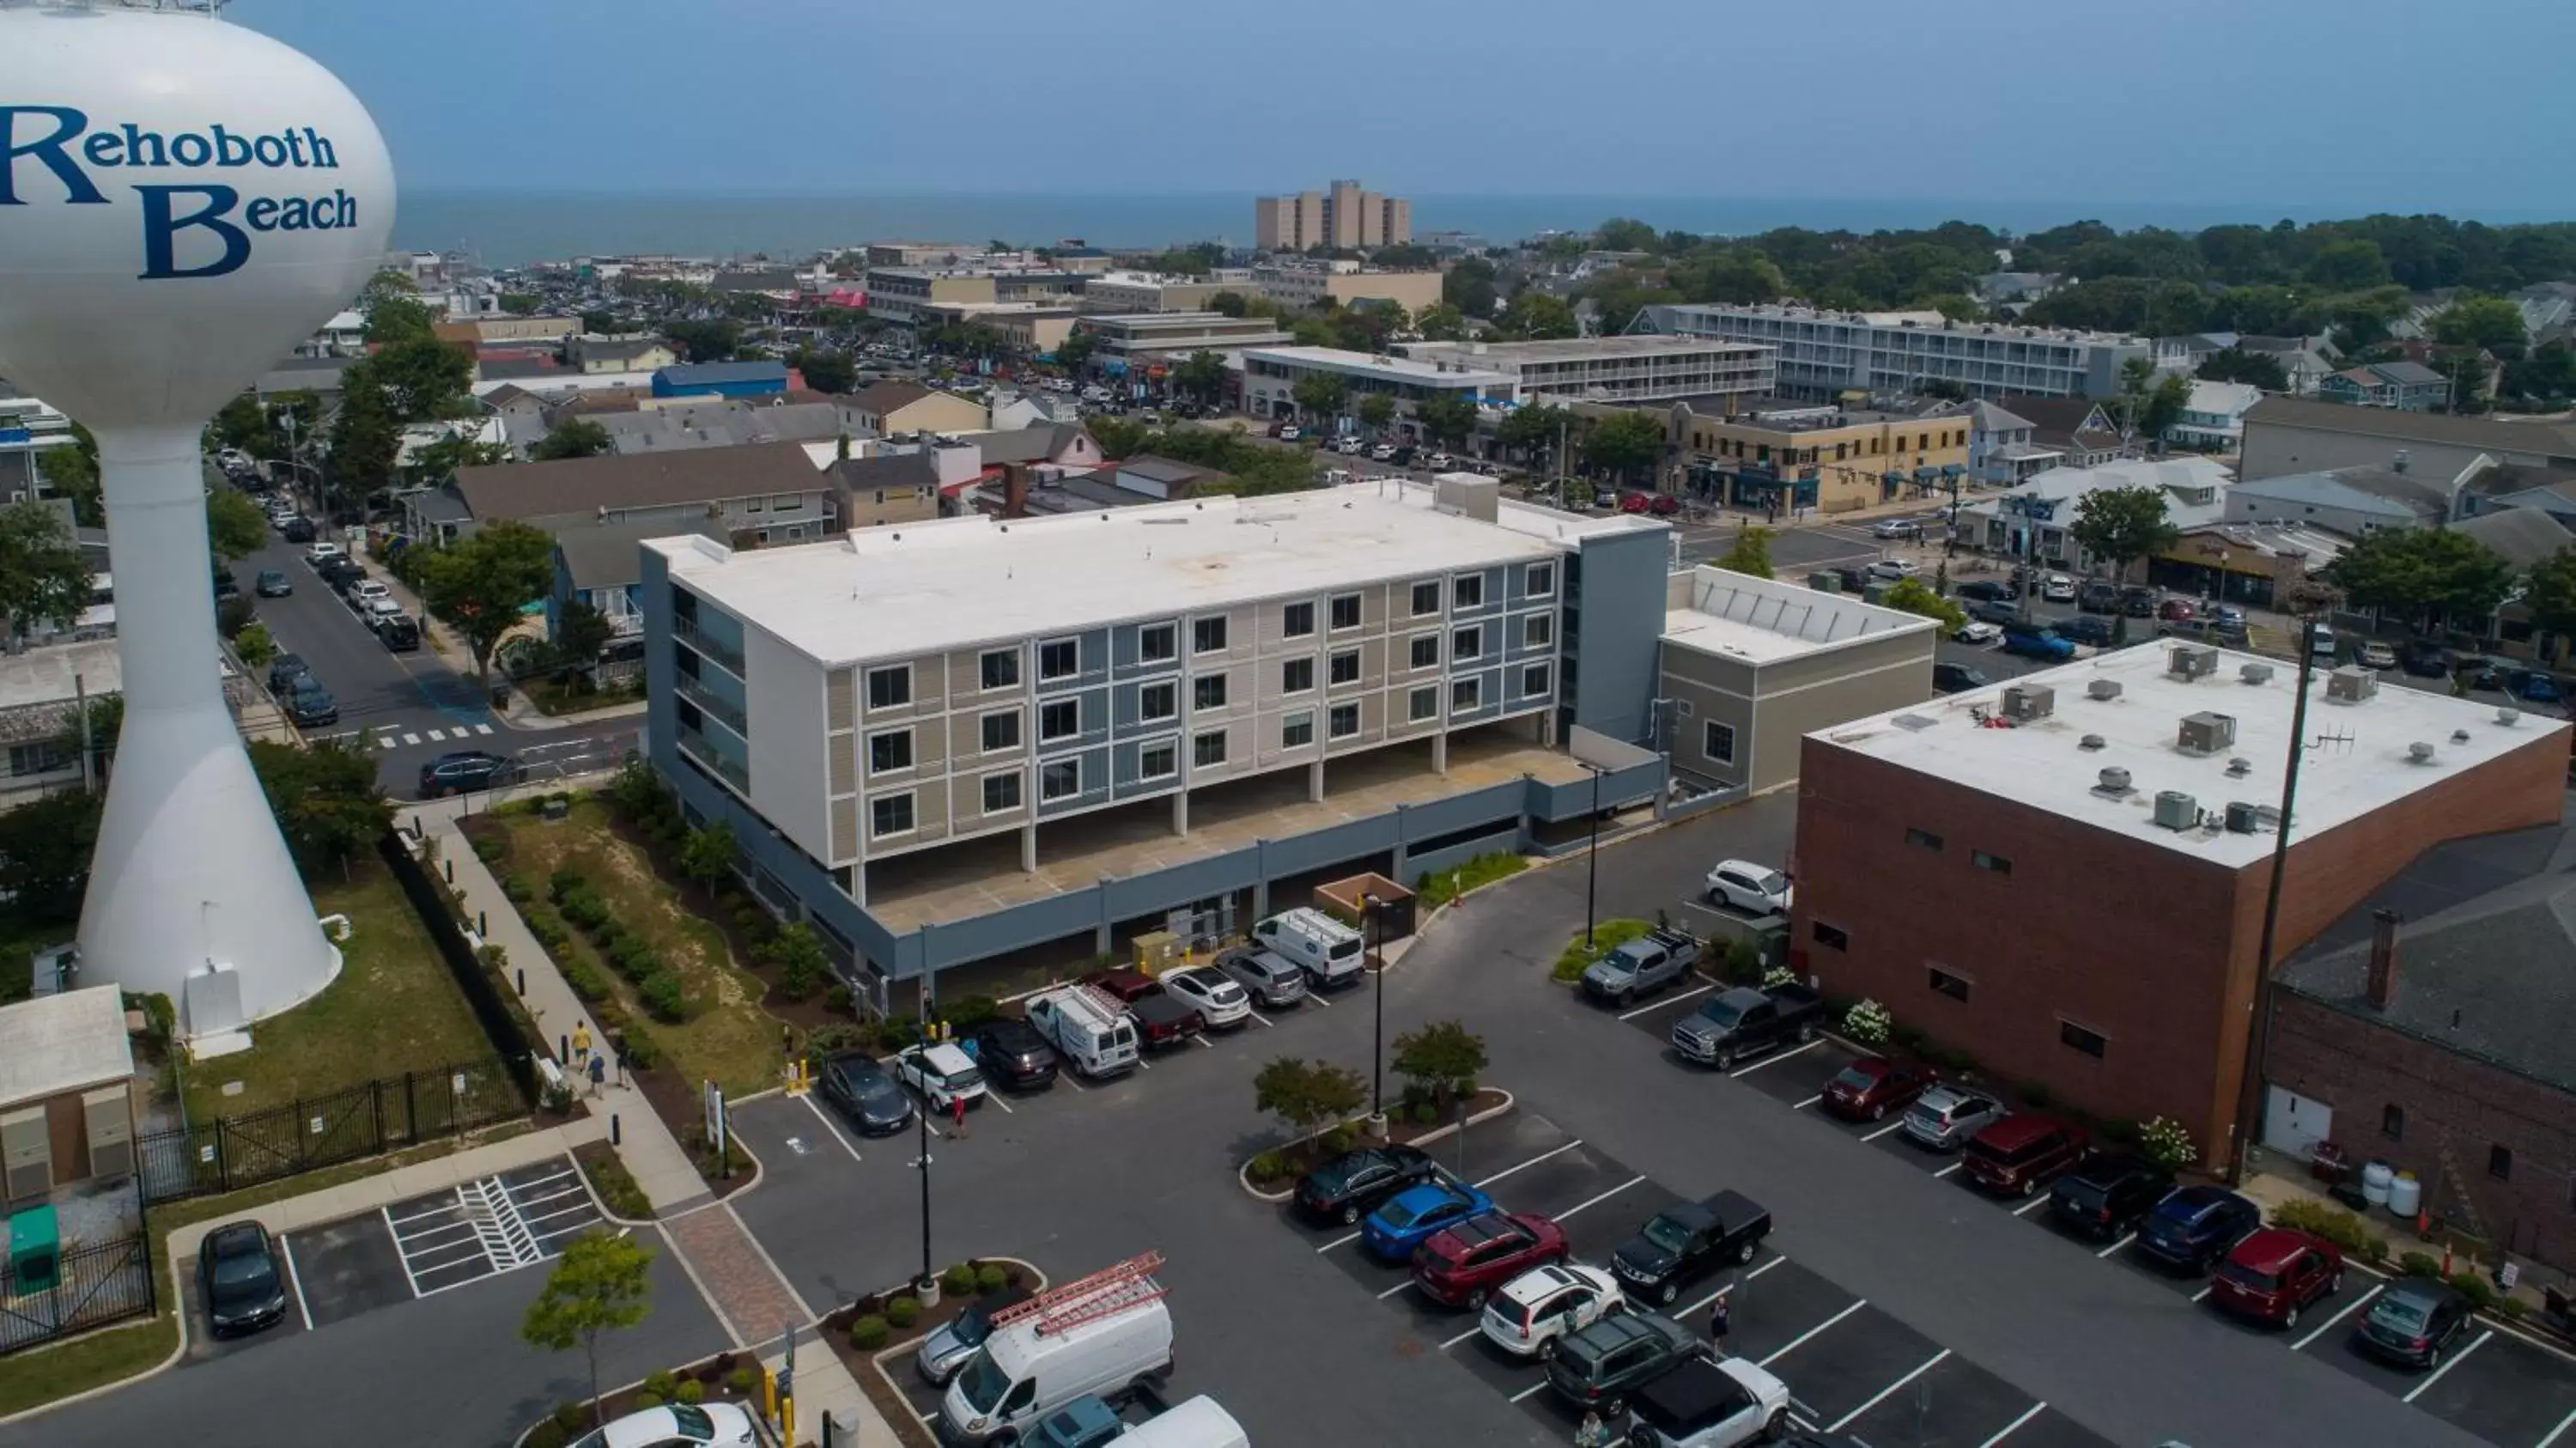 Property building, Bird's-eye View in Coast Rehoboth Beach, Tapestry Collection By Hilton